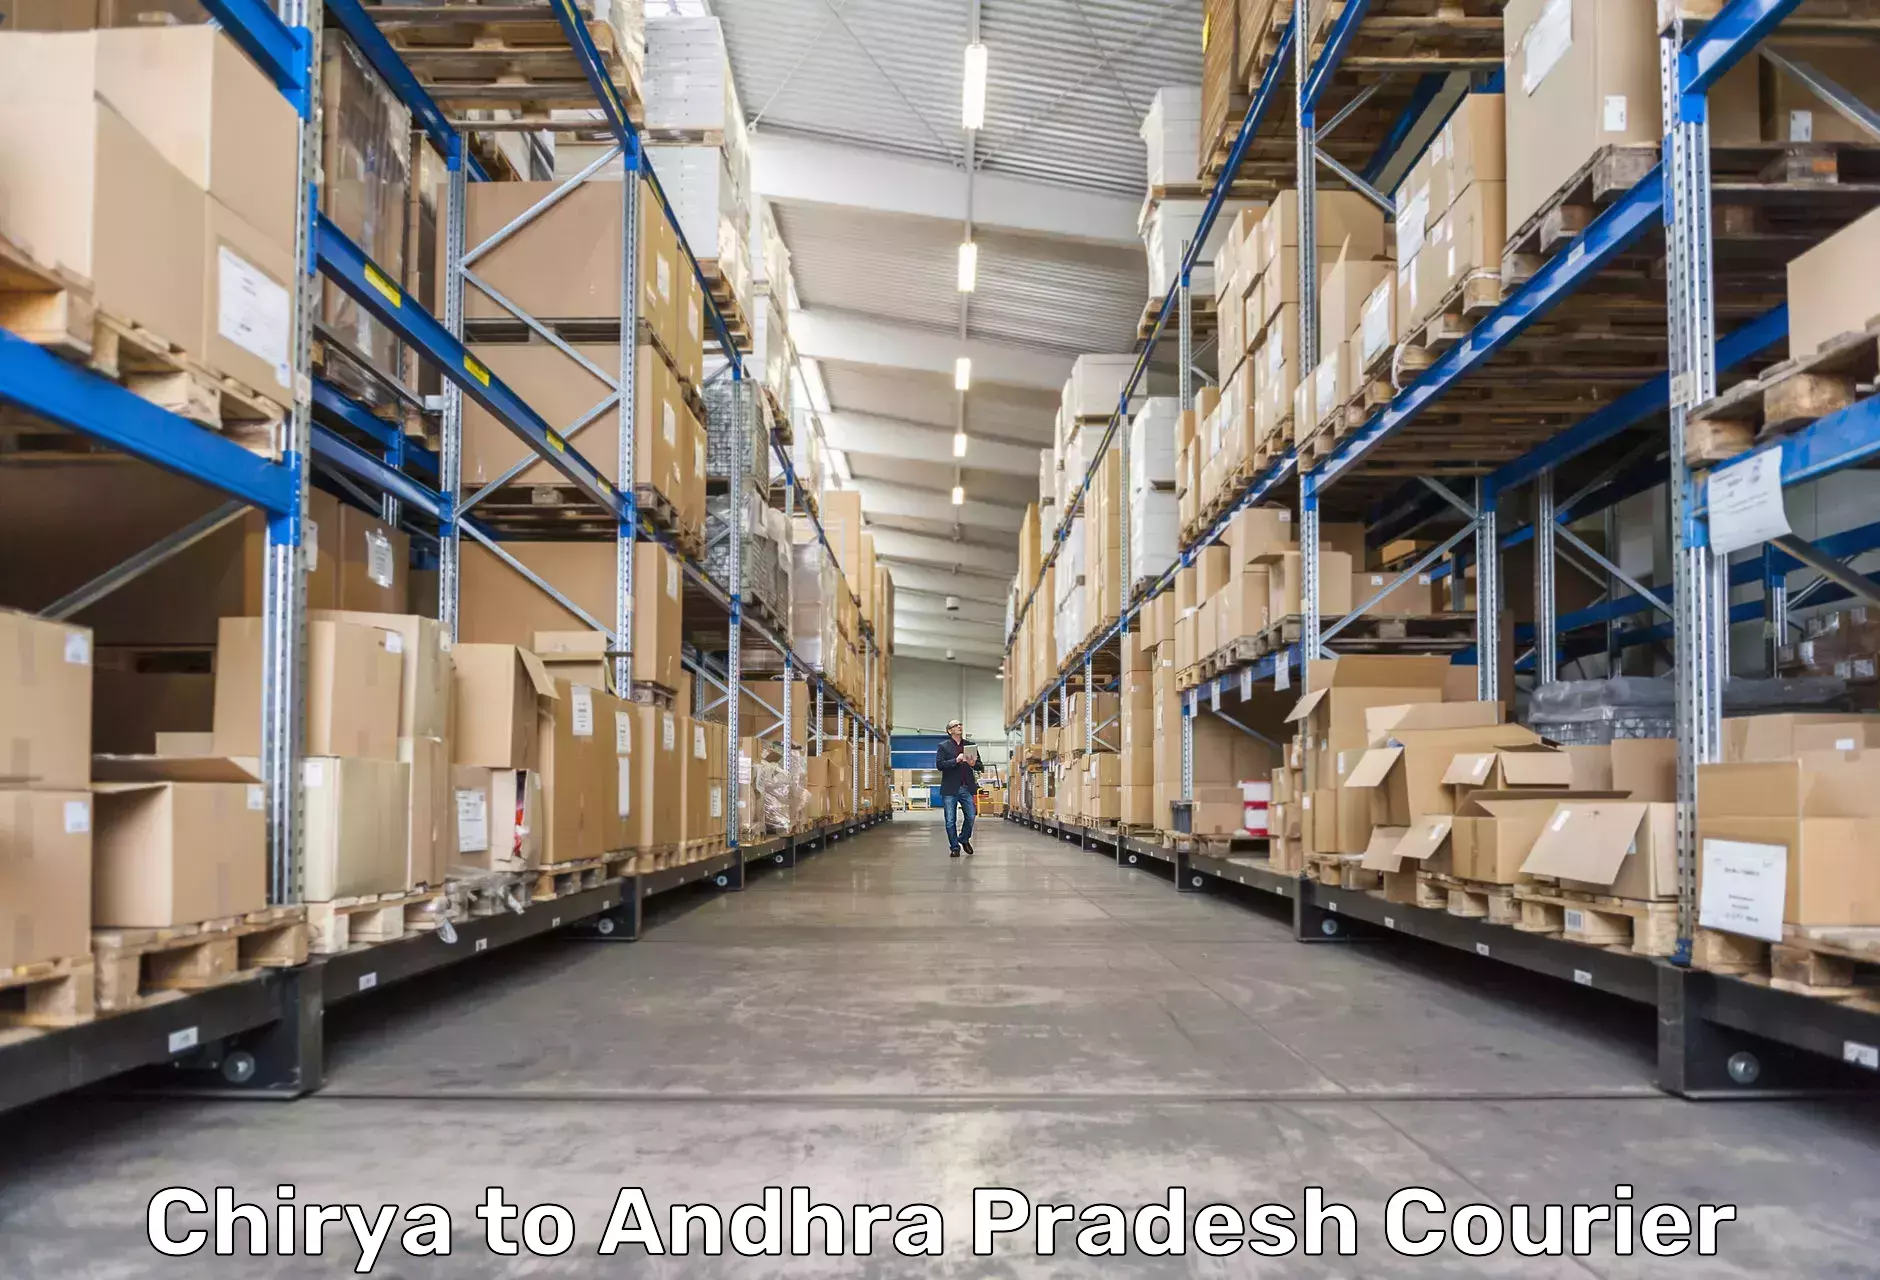 Express delivery network Chirya to Chittoor